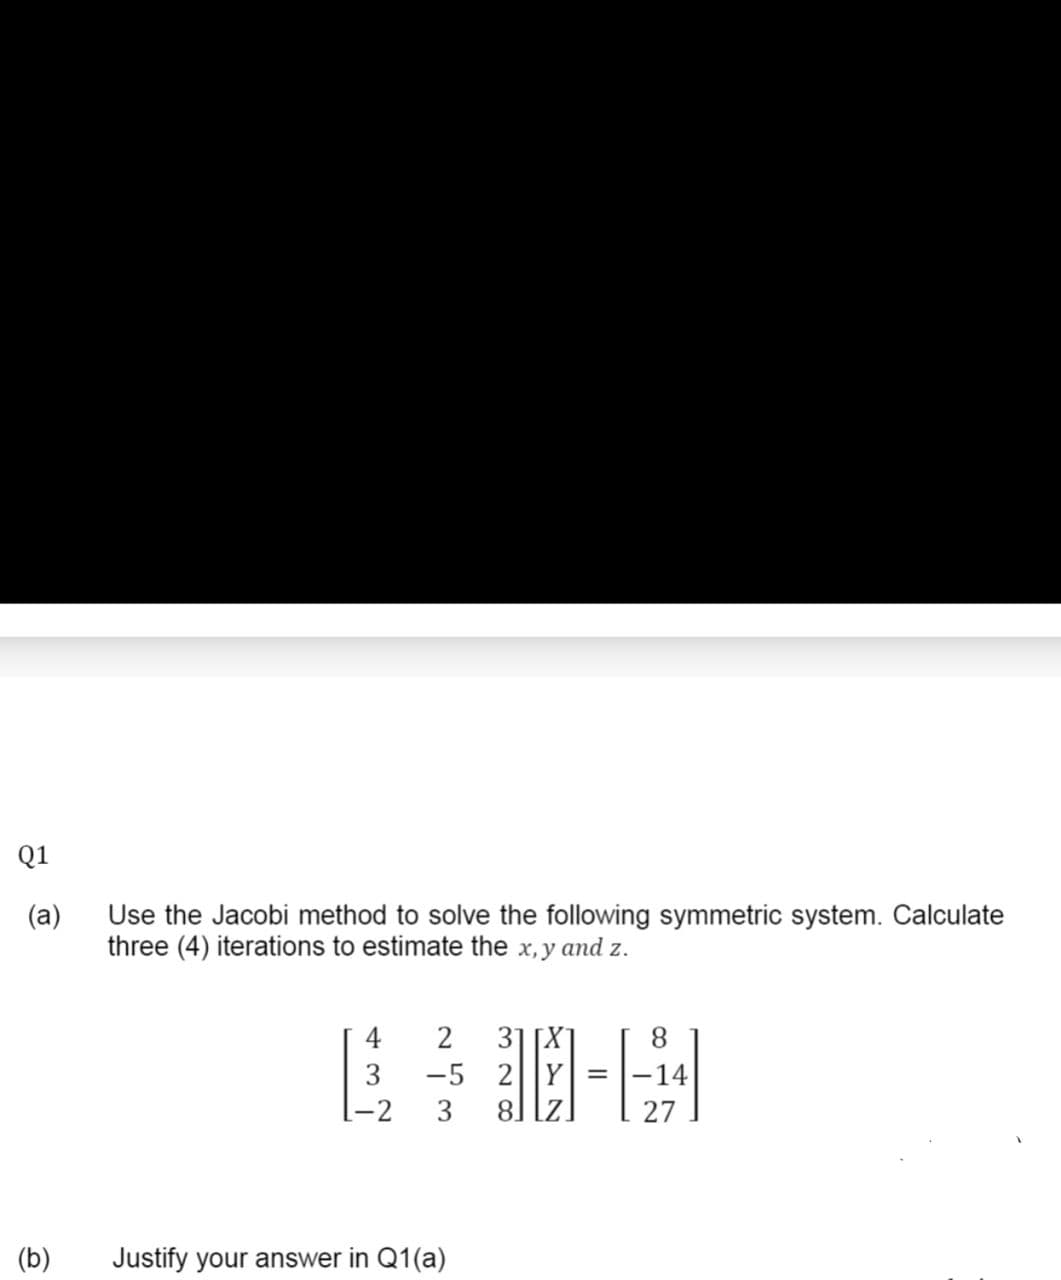 Q1
(a)
Use the Jacobi method to solve the following symmetric system. Calculate
three (4) iterations to estimate the x, y and z.
31 [X
-5 2||Y| =
8] [z.
4
2
8.
3
-2
3
(b)
Justify your answer in Q1(a)
